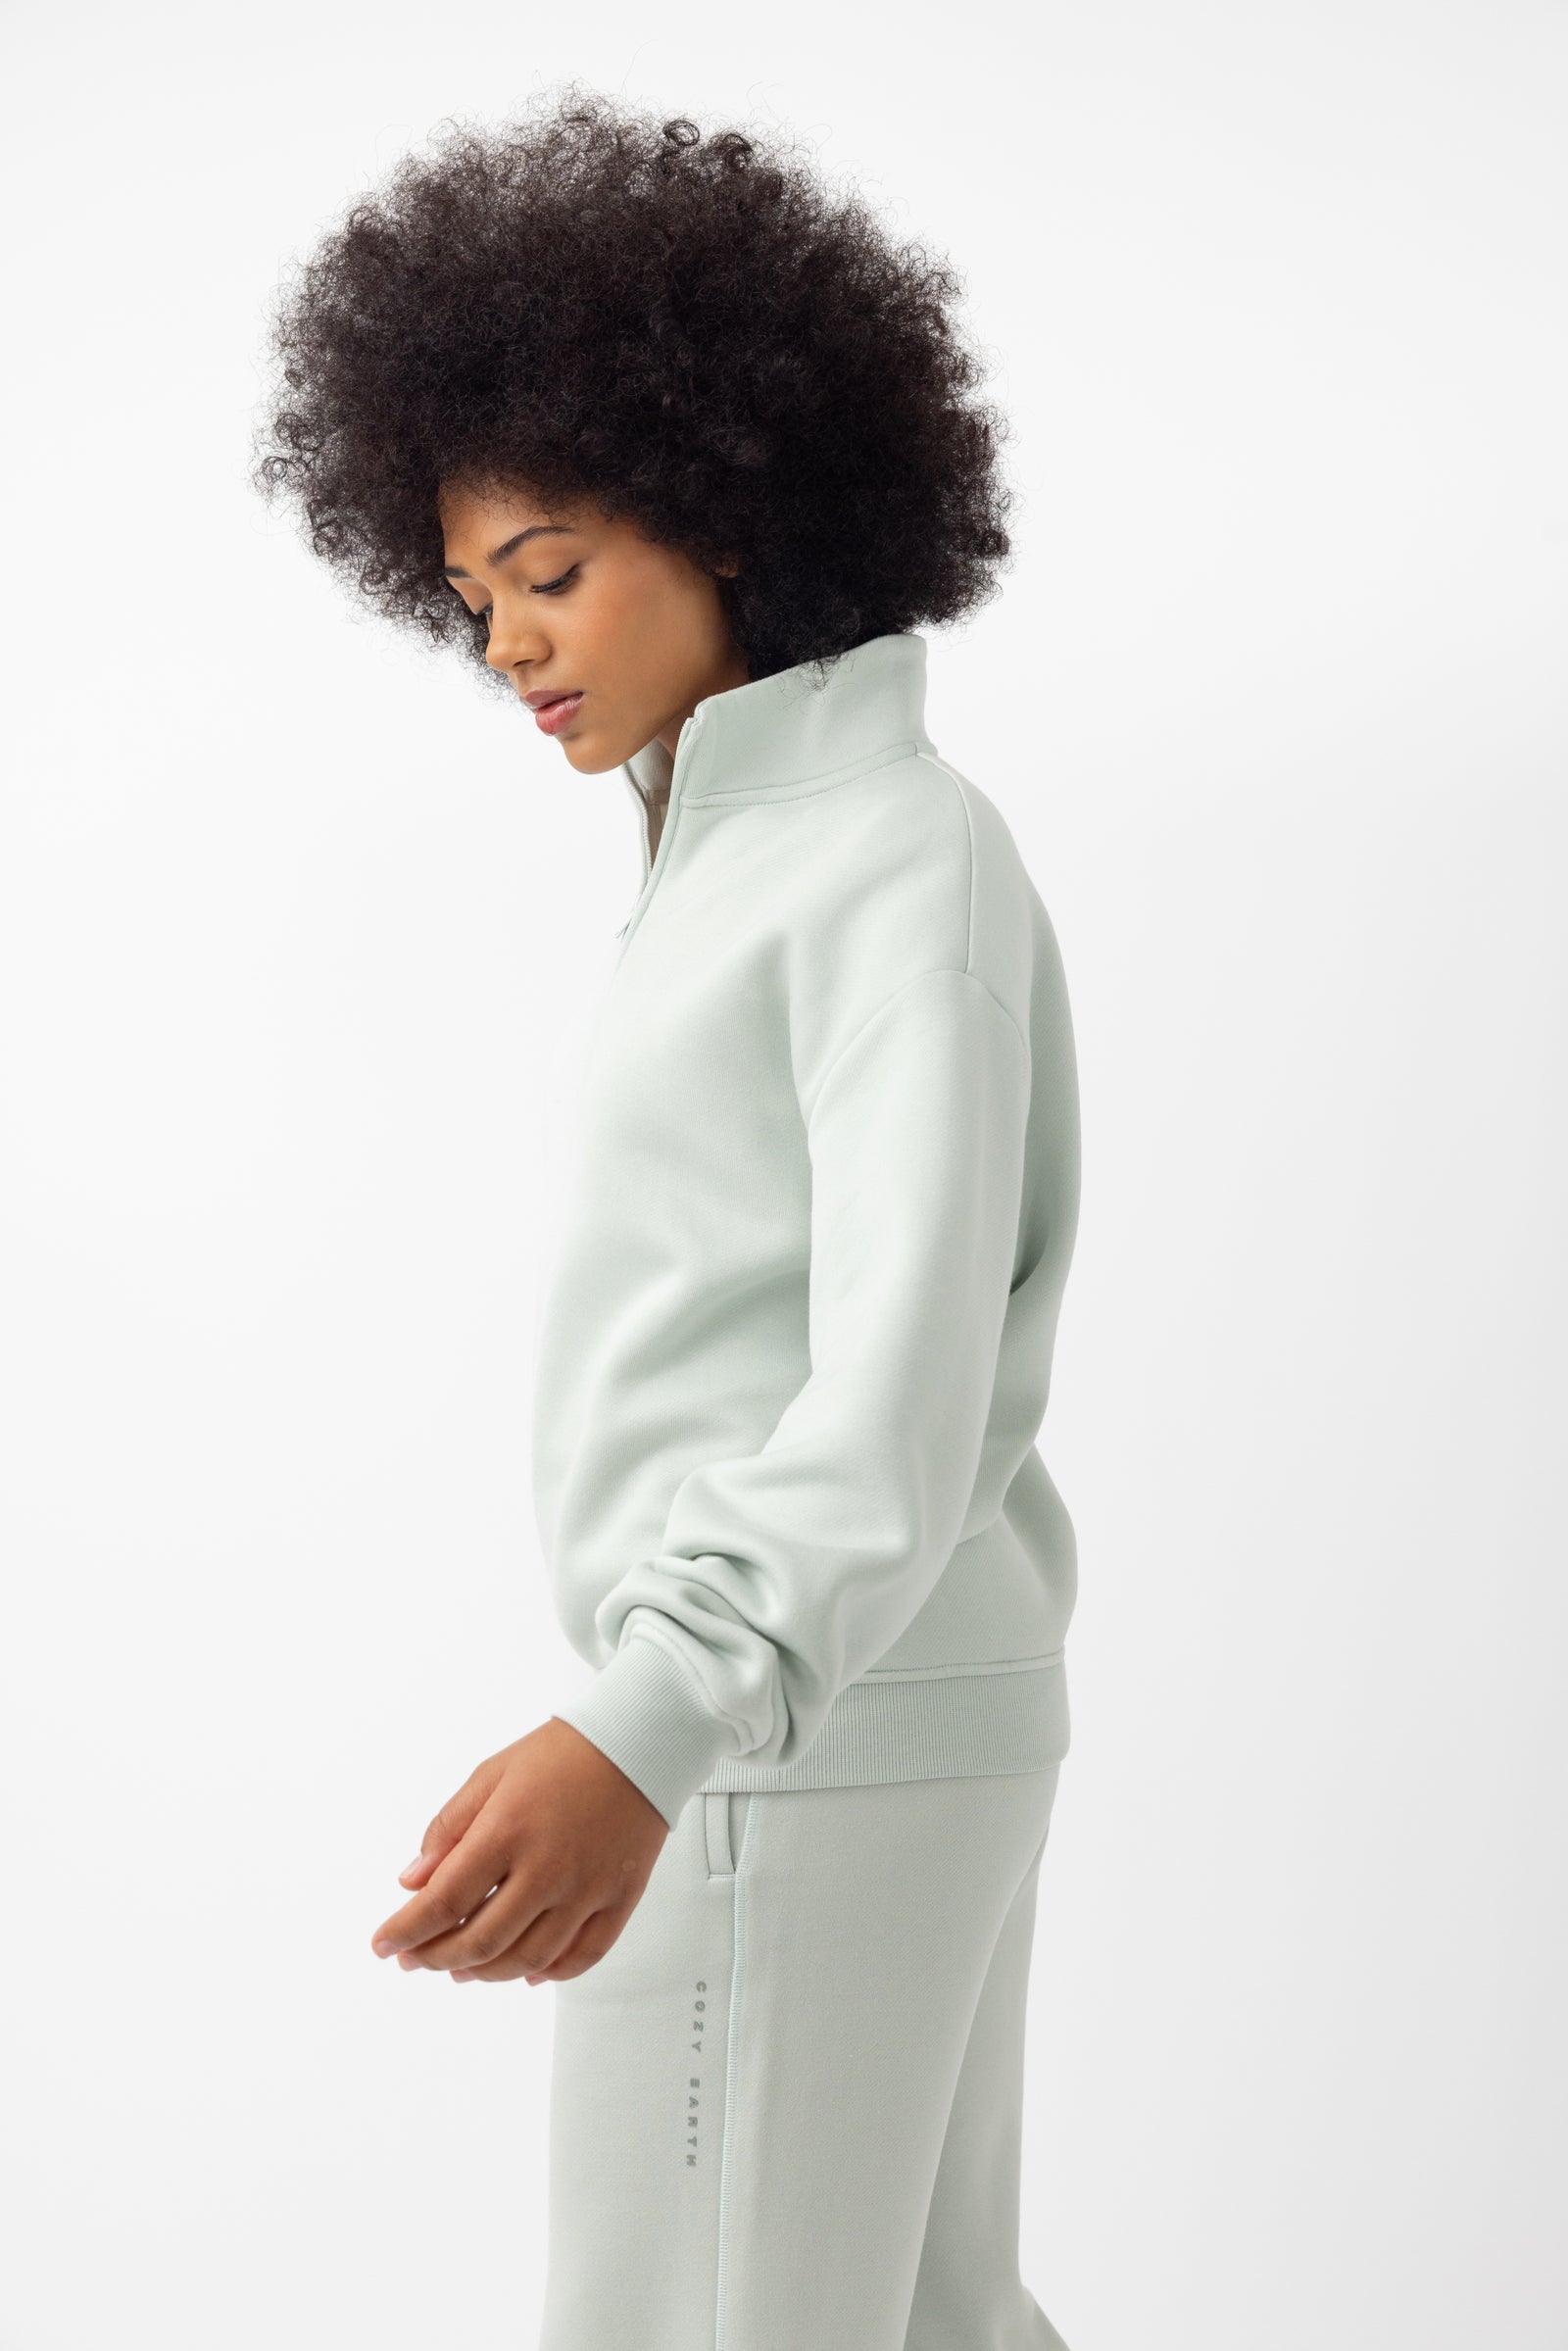 Arctic CityScape Quarter Zip. The quarter zip is being worn by a female model. The model is wearing accompanying CityScape clothing to complete the look of the quarter zip. The photo was taken with a white background. 